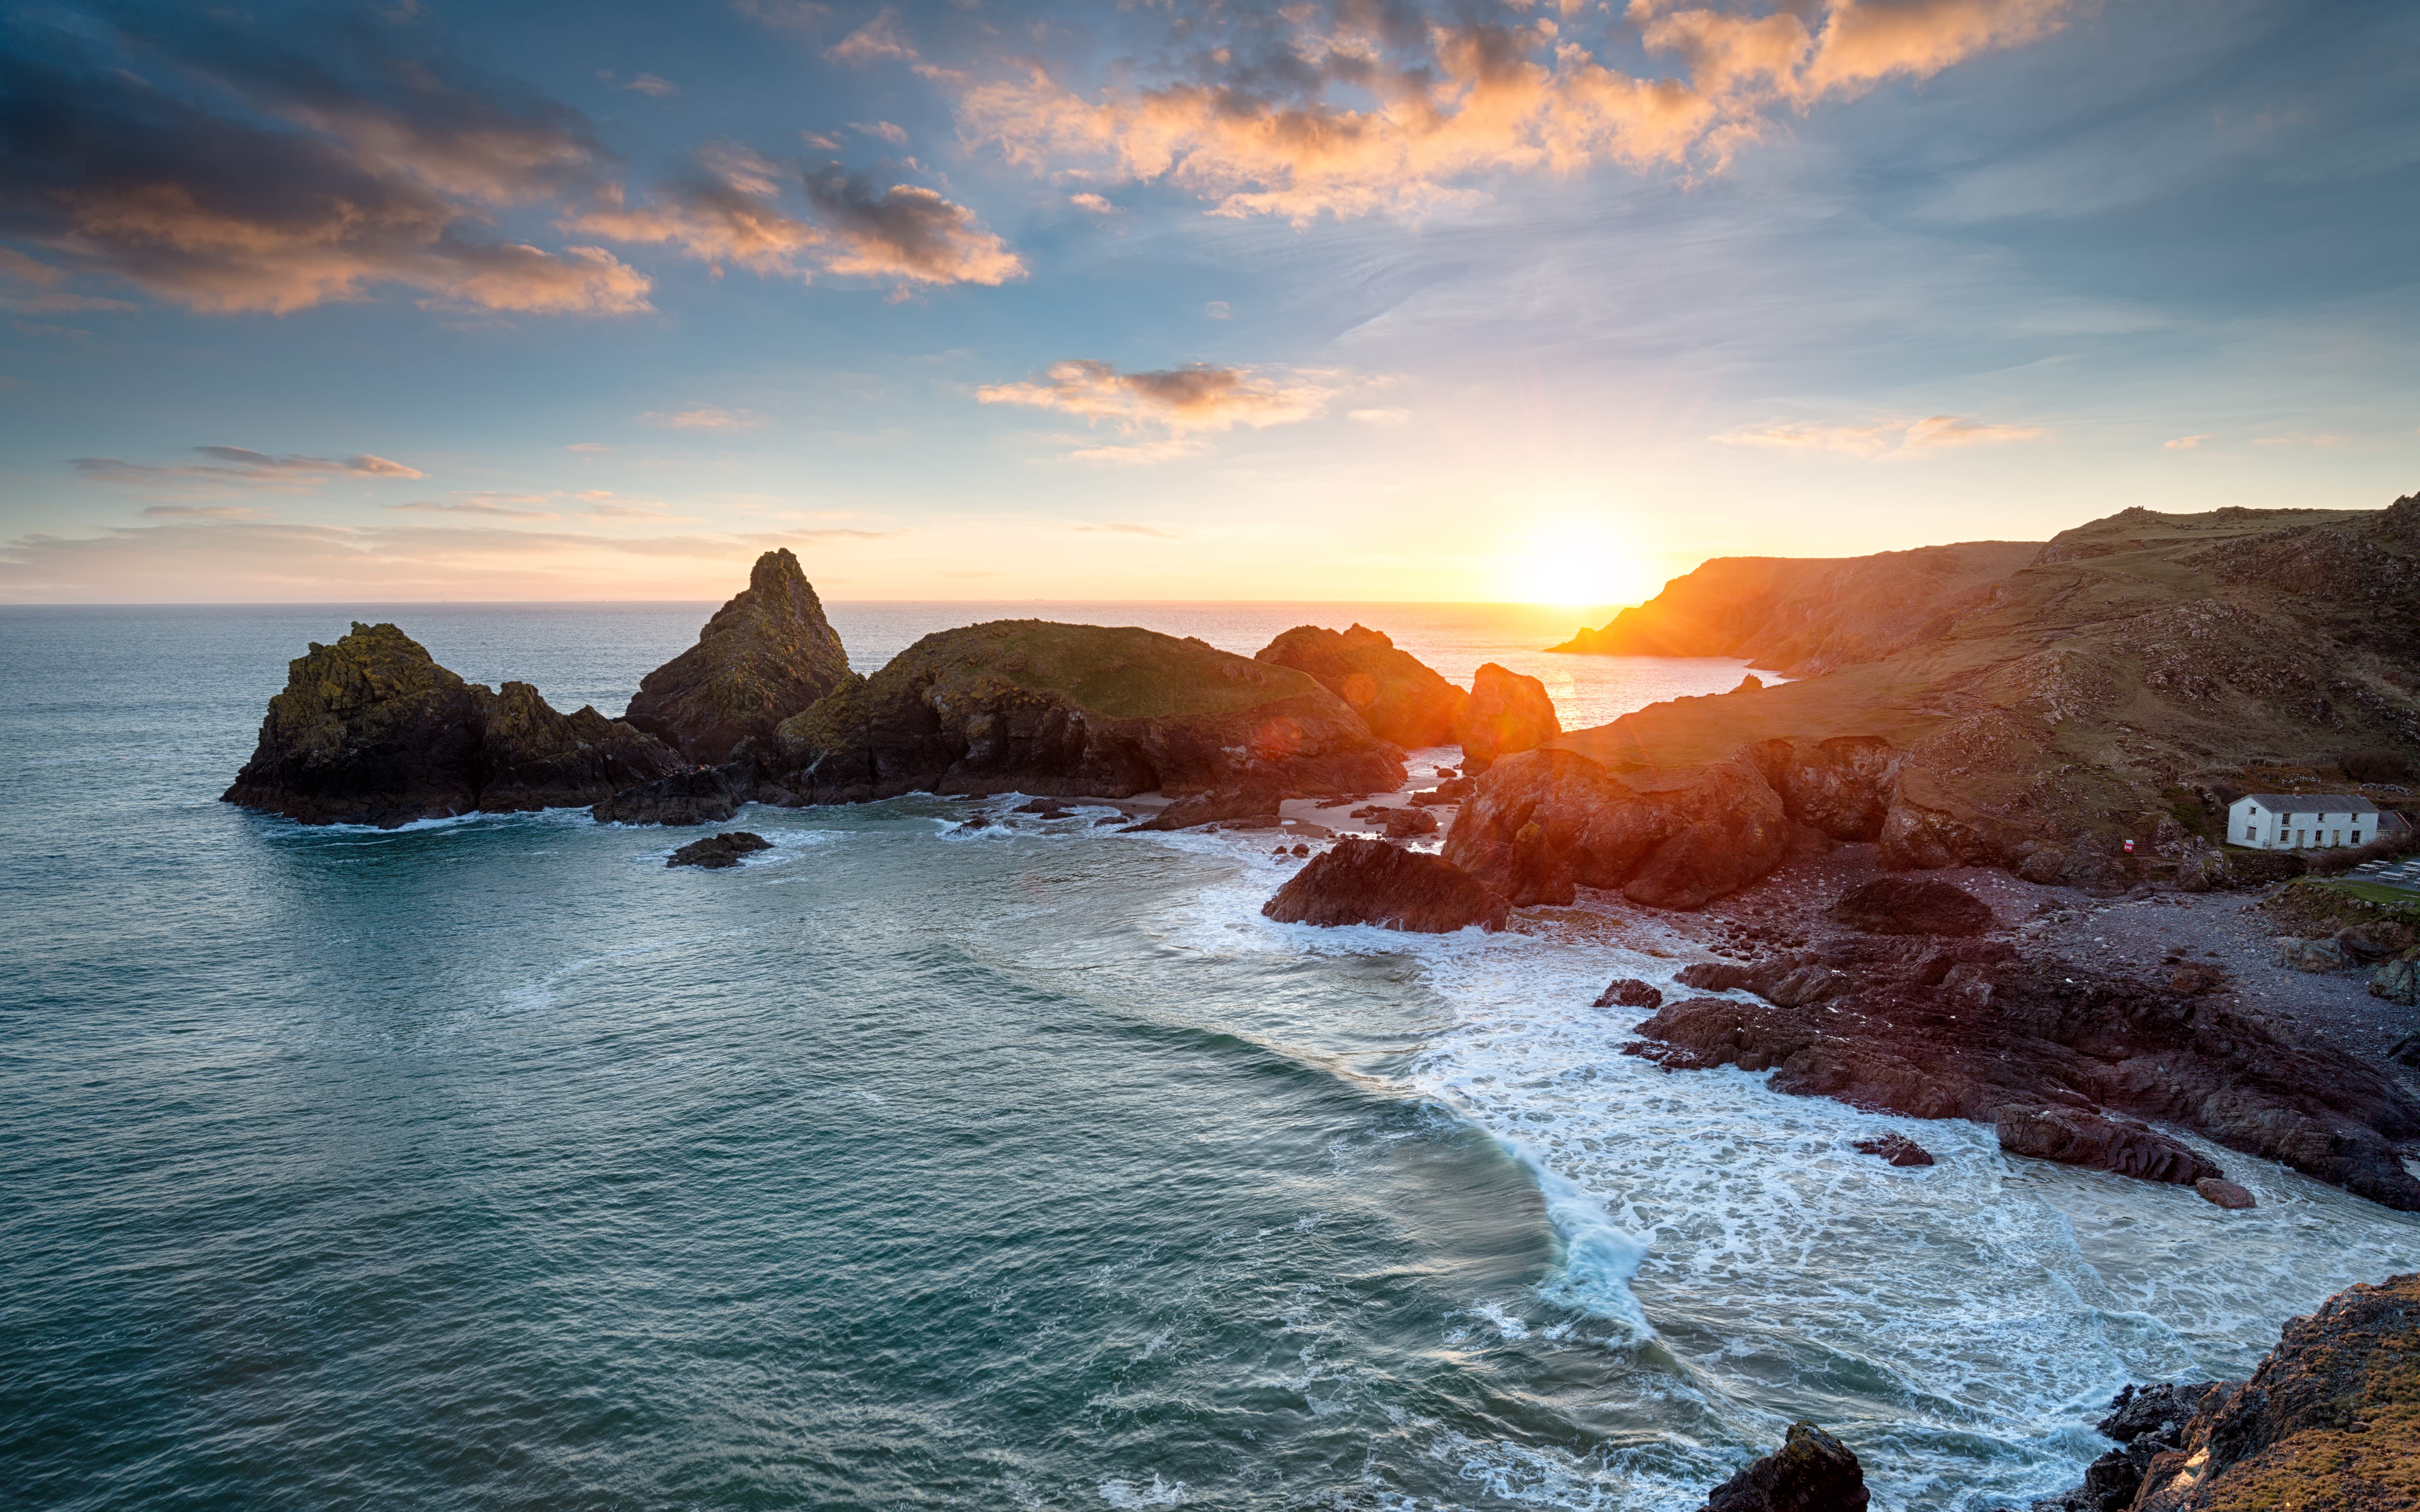 Image of a sunset over Kynance Cove on the Lizard Peninsula in Cornwall.